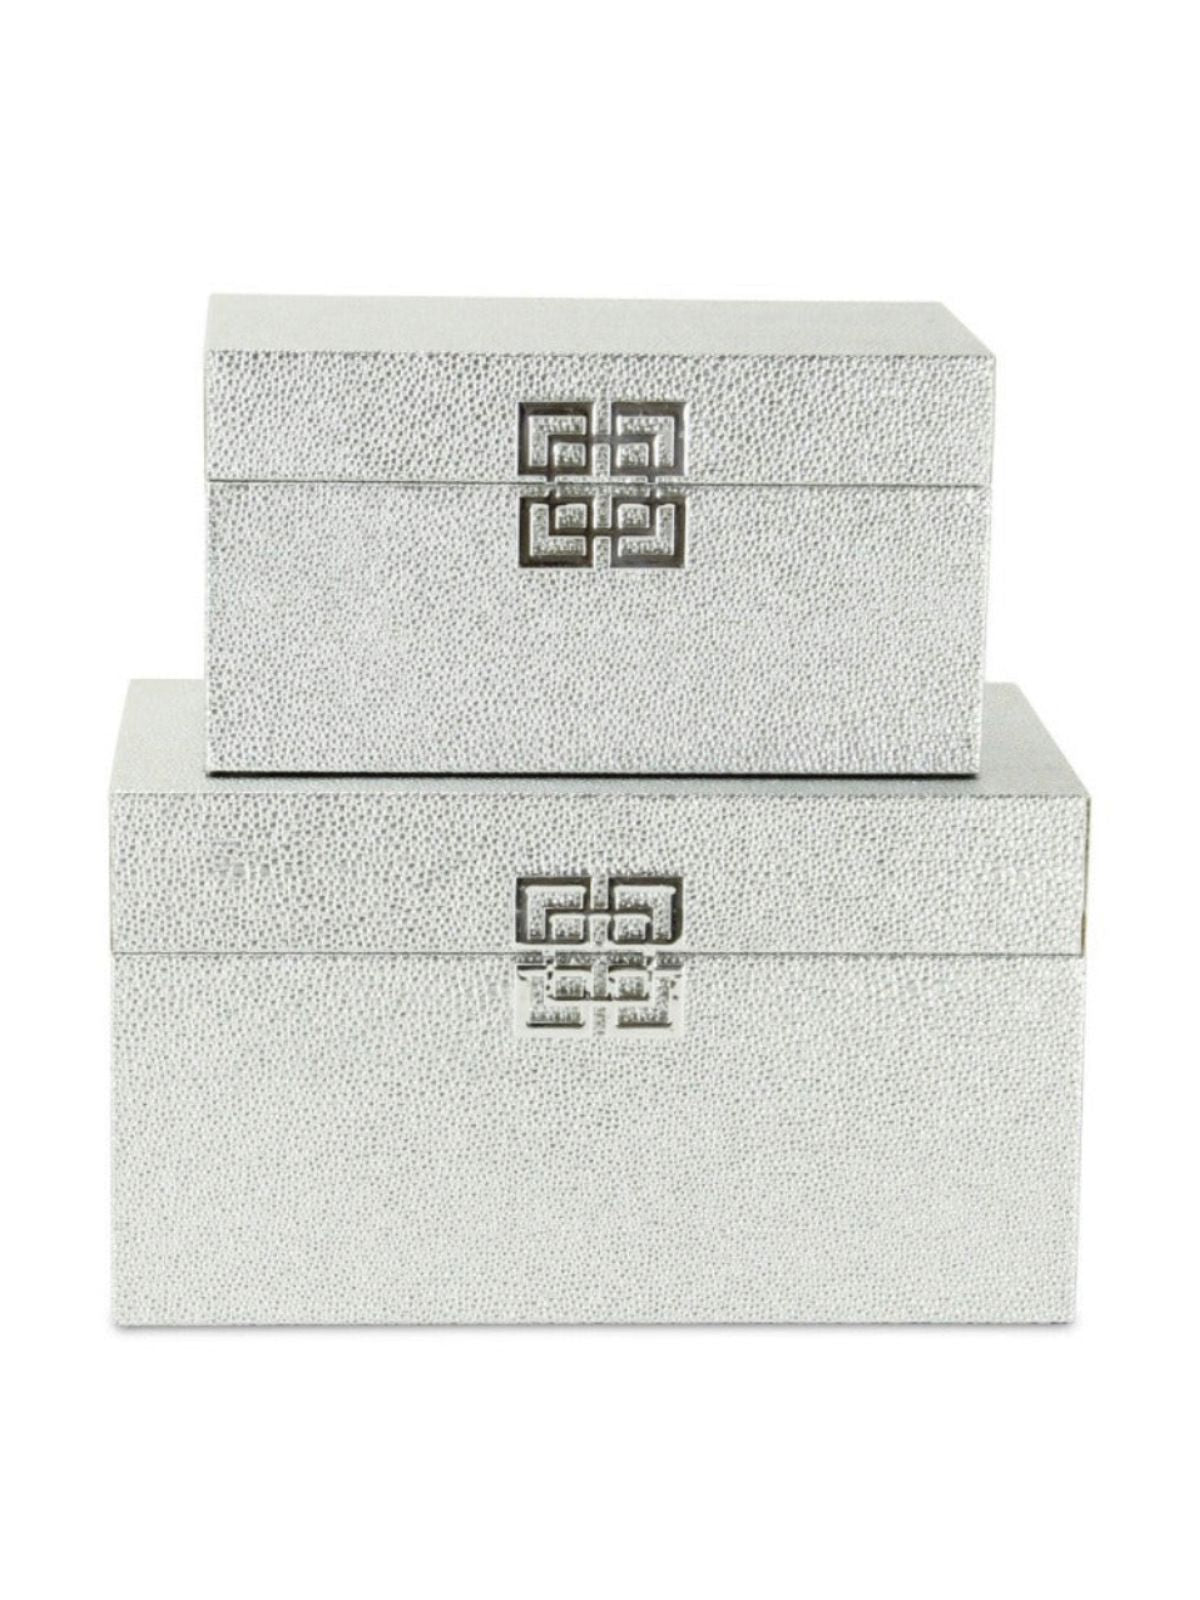 Keepsake boxes have provided a unique elegant touch to many spaces. Perfect for storing treasured items, they provide an eye-catching and warm look. The Doppia Felicita Box Set features a silver shagreen body with a Happiness symbolic front handle!